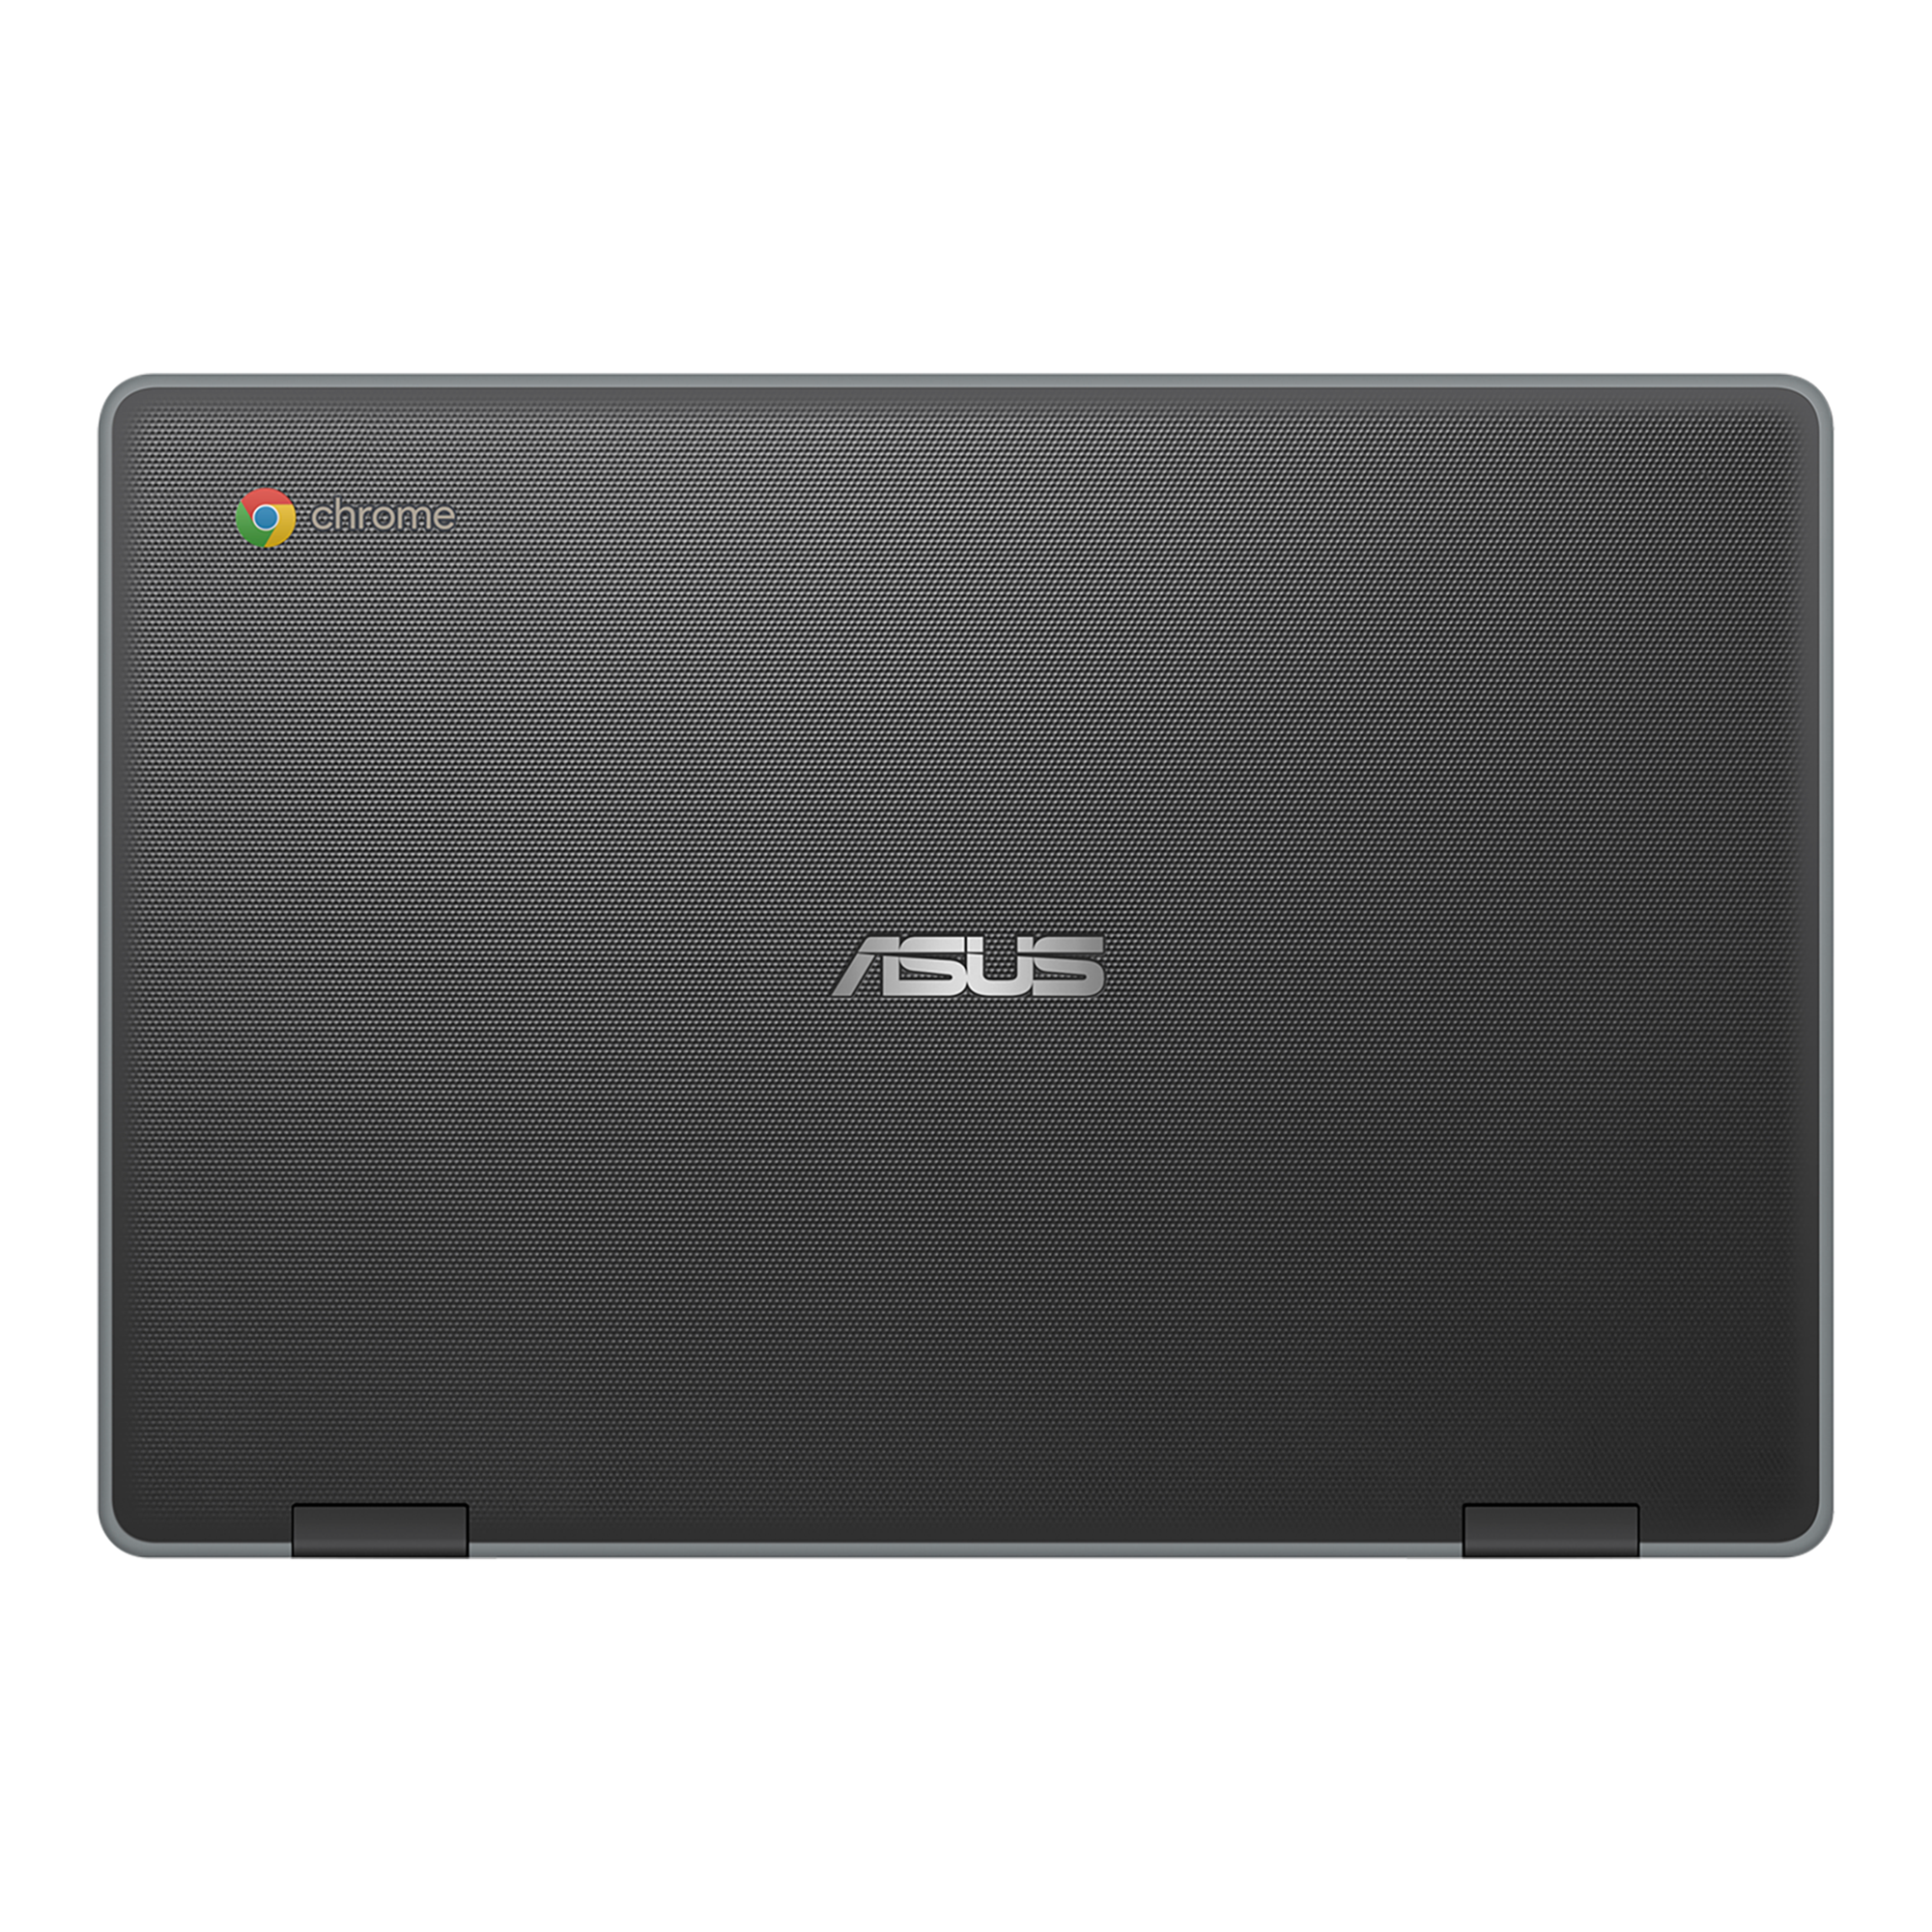 ASUS Chromebook C204｜Laptops For Home｜ASUS USA